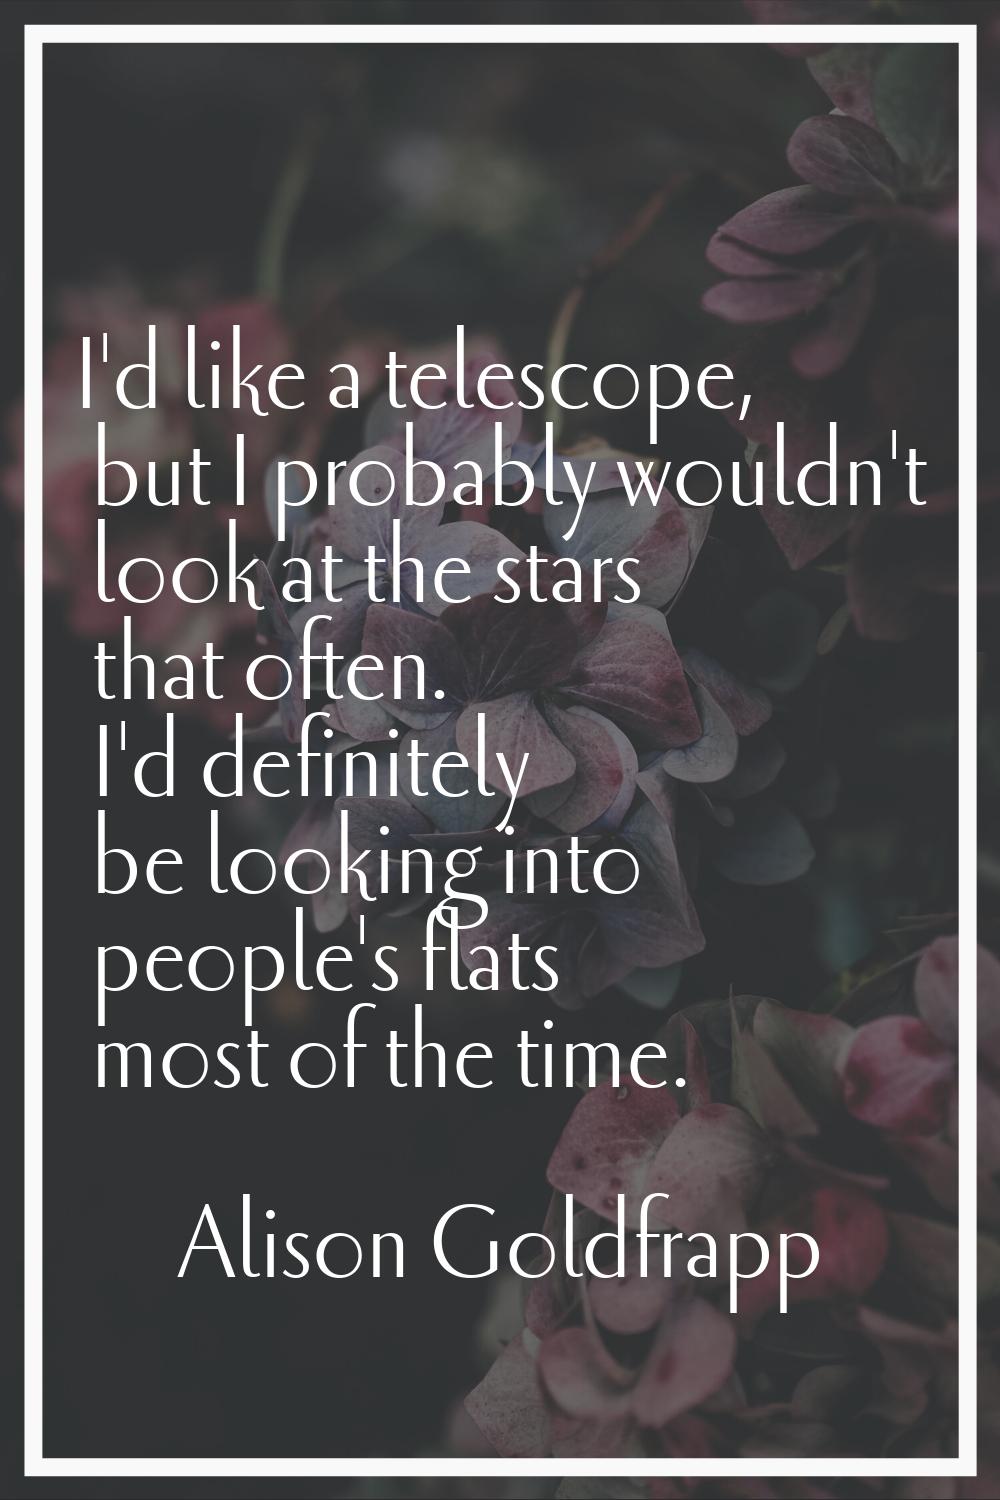 I'd like a telescope, but I probably wouldn't look at the stars that often. I'd definitely be looki